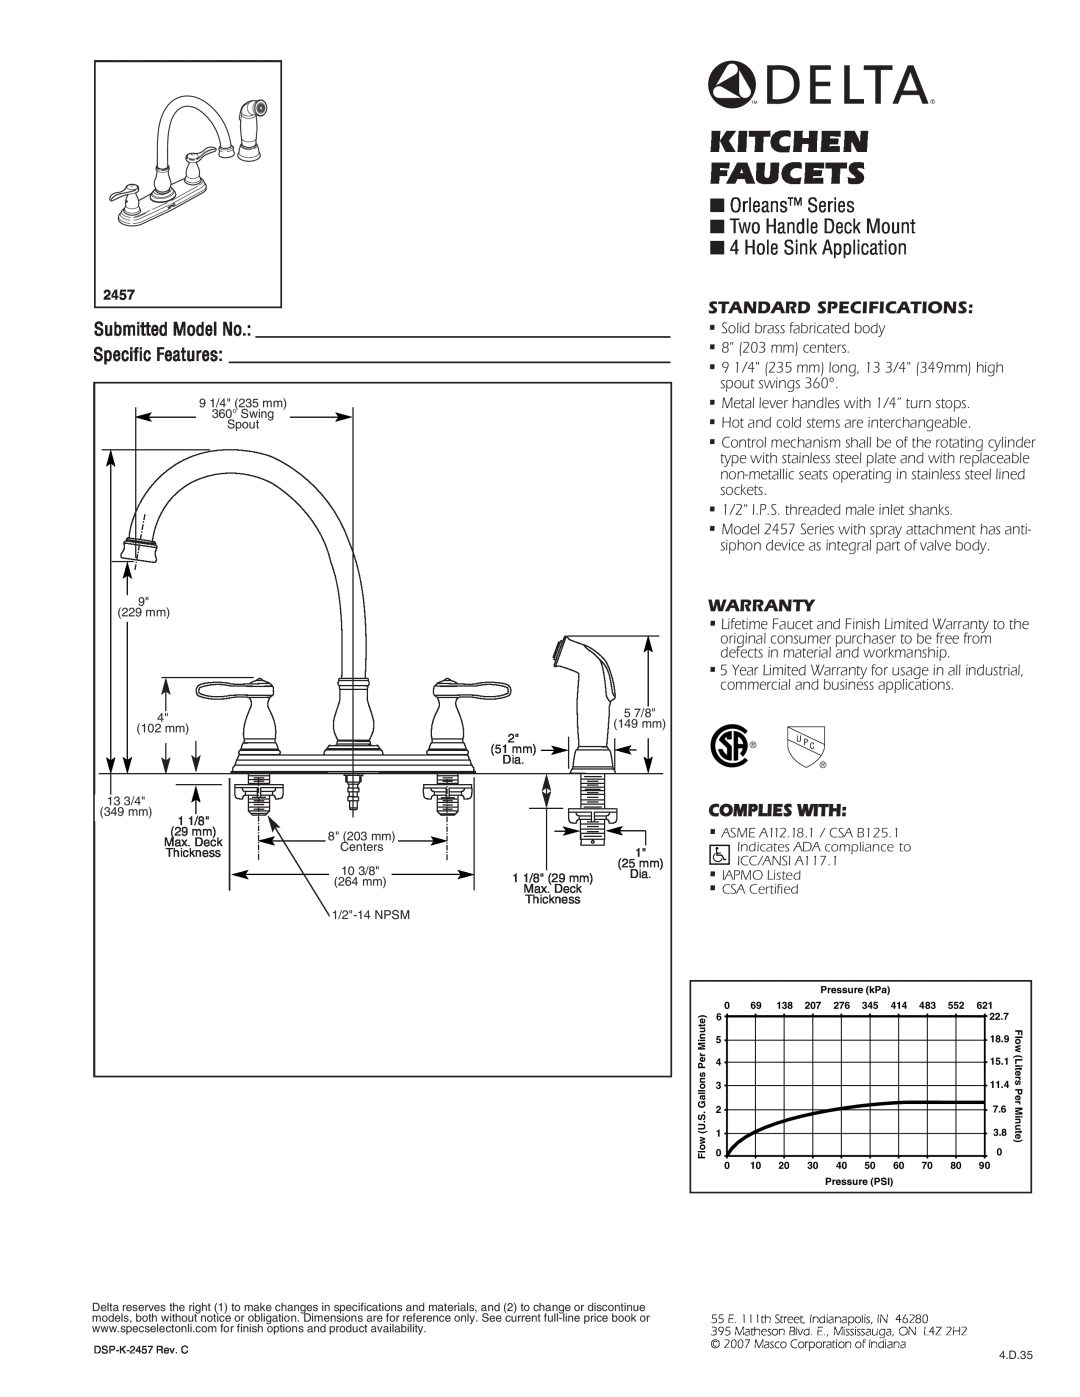 Delta 2457 specifications Kitchen Faucets, Orleans Series Two Handle Deck Mount 4 Hole Sink Application, Warranty 